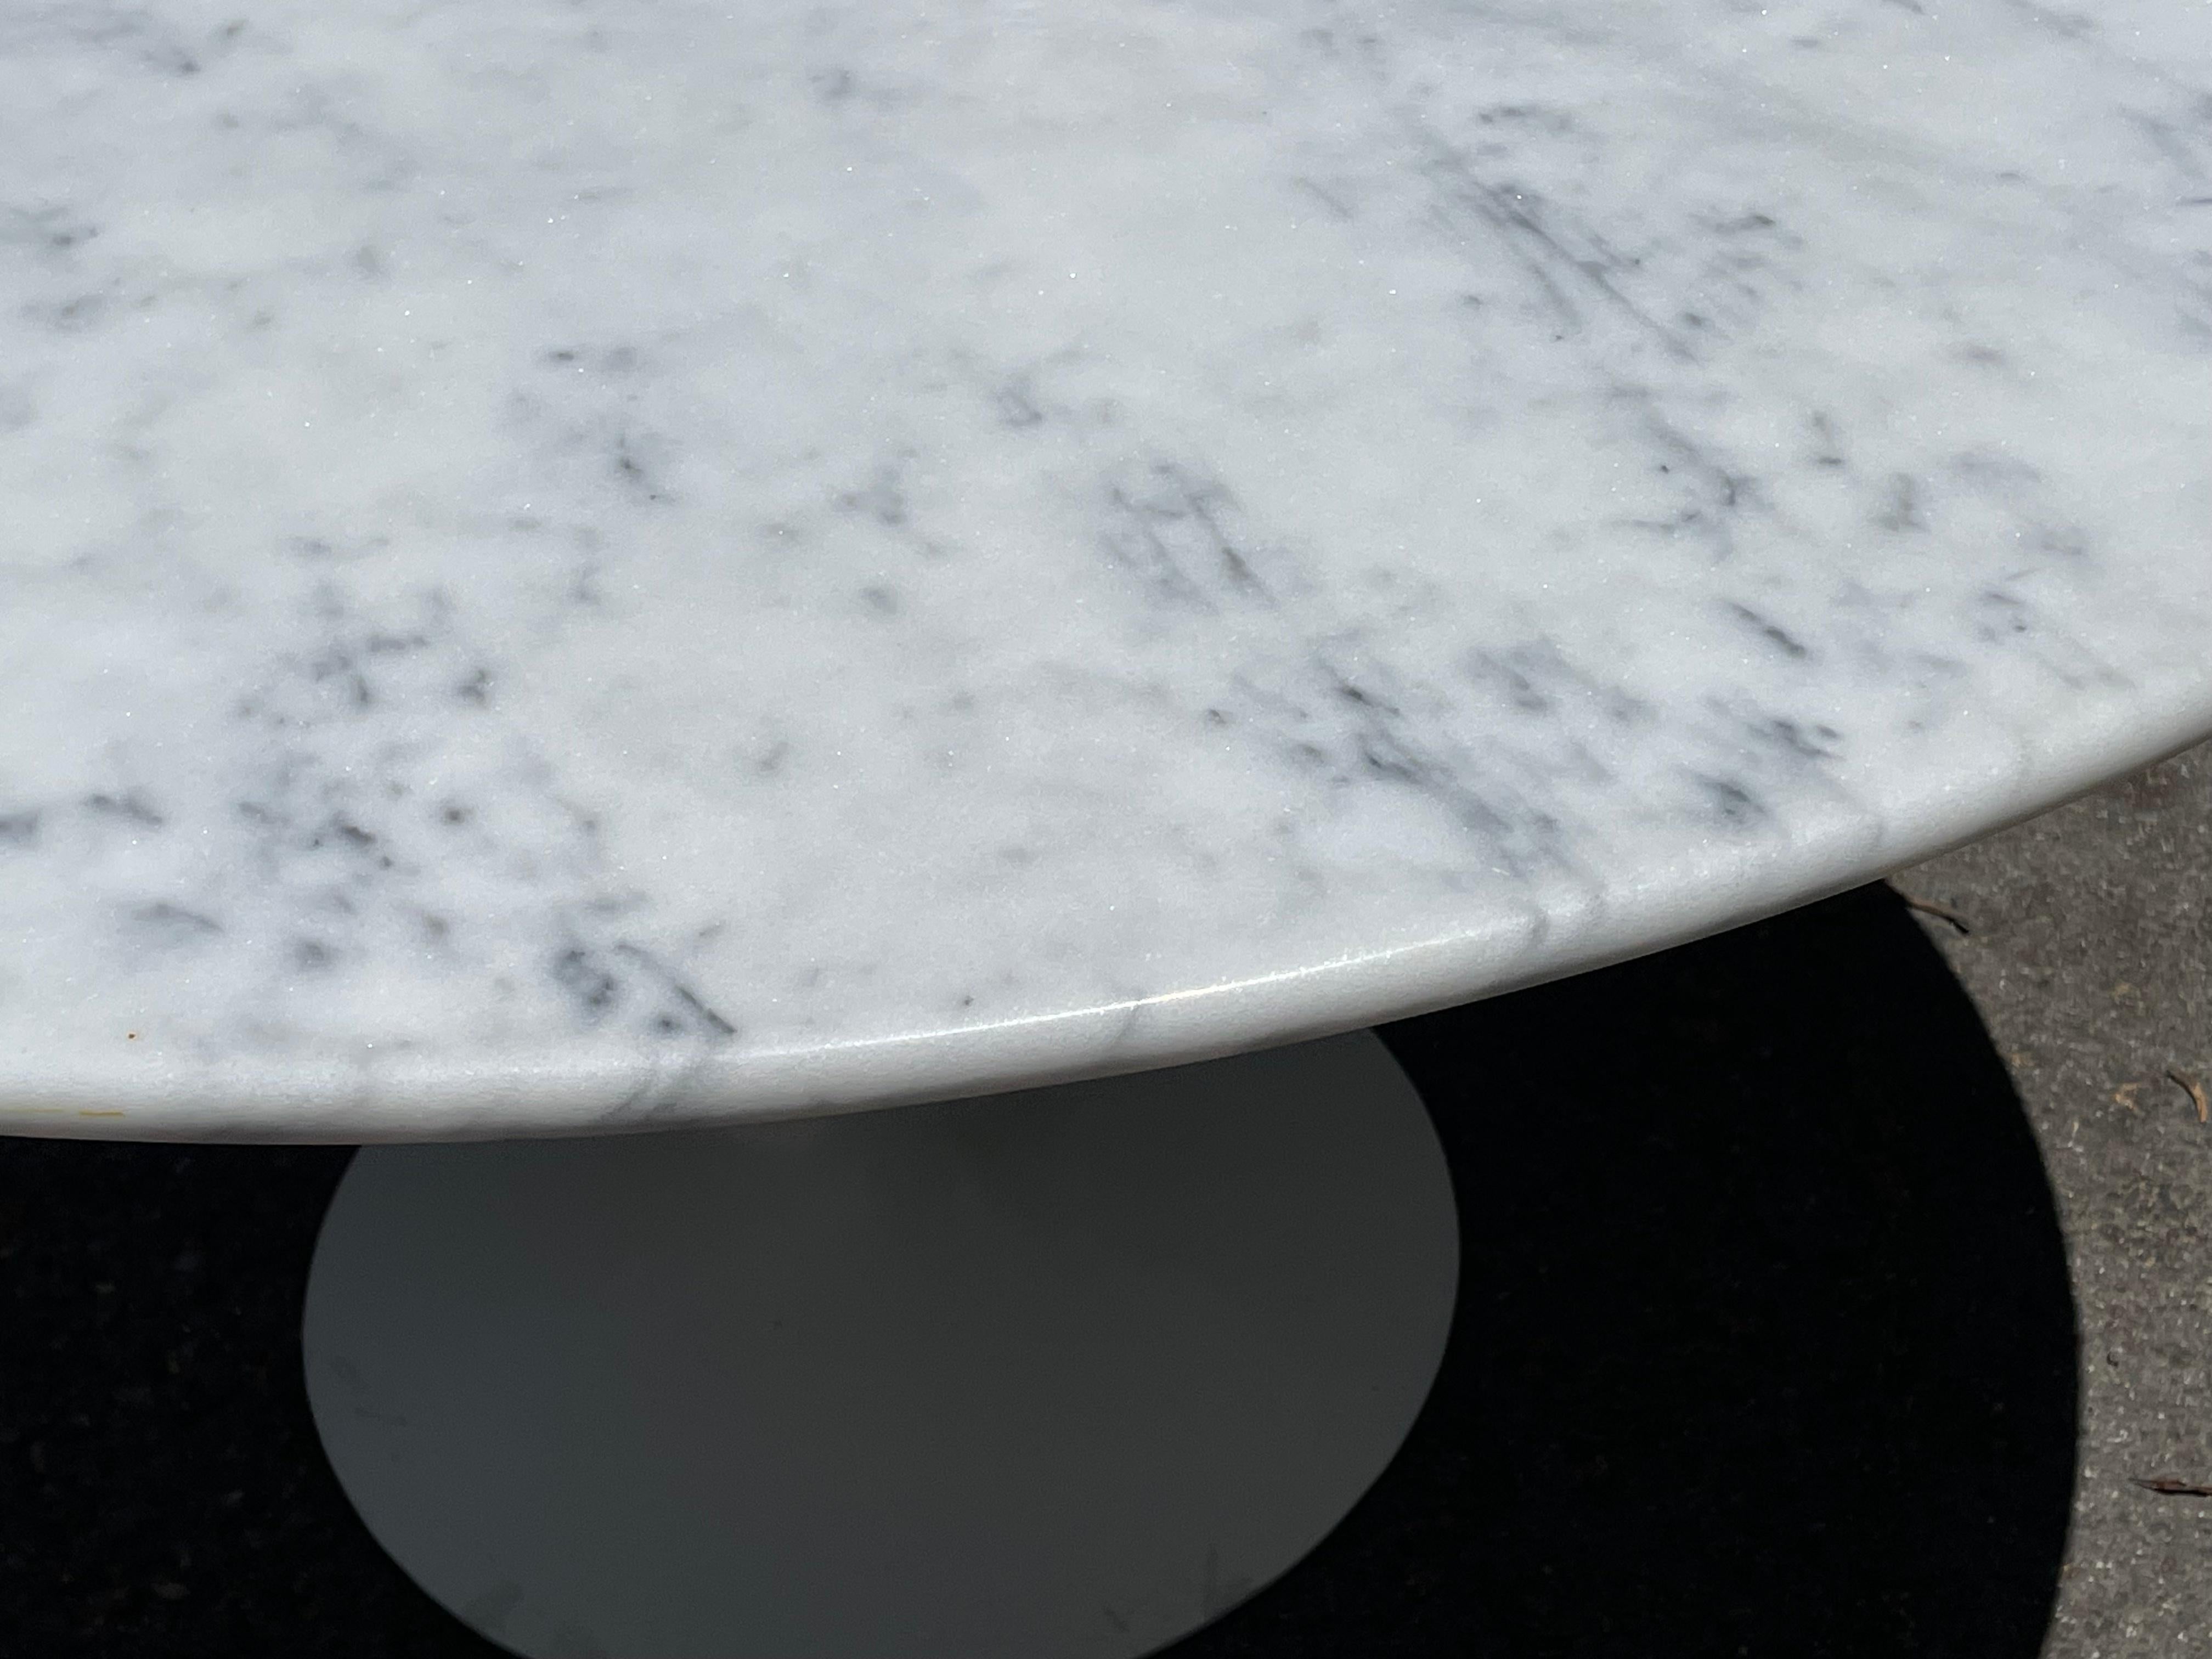 Remarkable original Eero Saarinen for Knoll Associates Tulip Dining Table with Marble Top, 1960s.

Exquisite vintage Tulip table by the iconic designer Eero Saarinen. This particular table is made by Knoll Associates in the USA in the 1960s. It